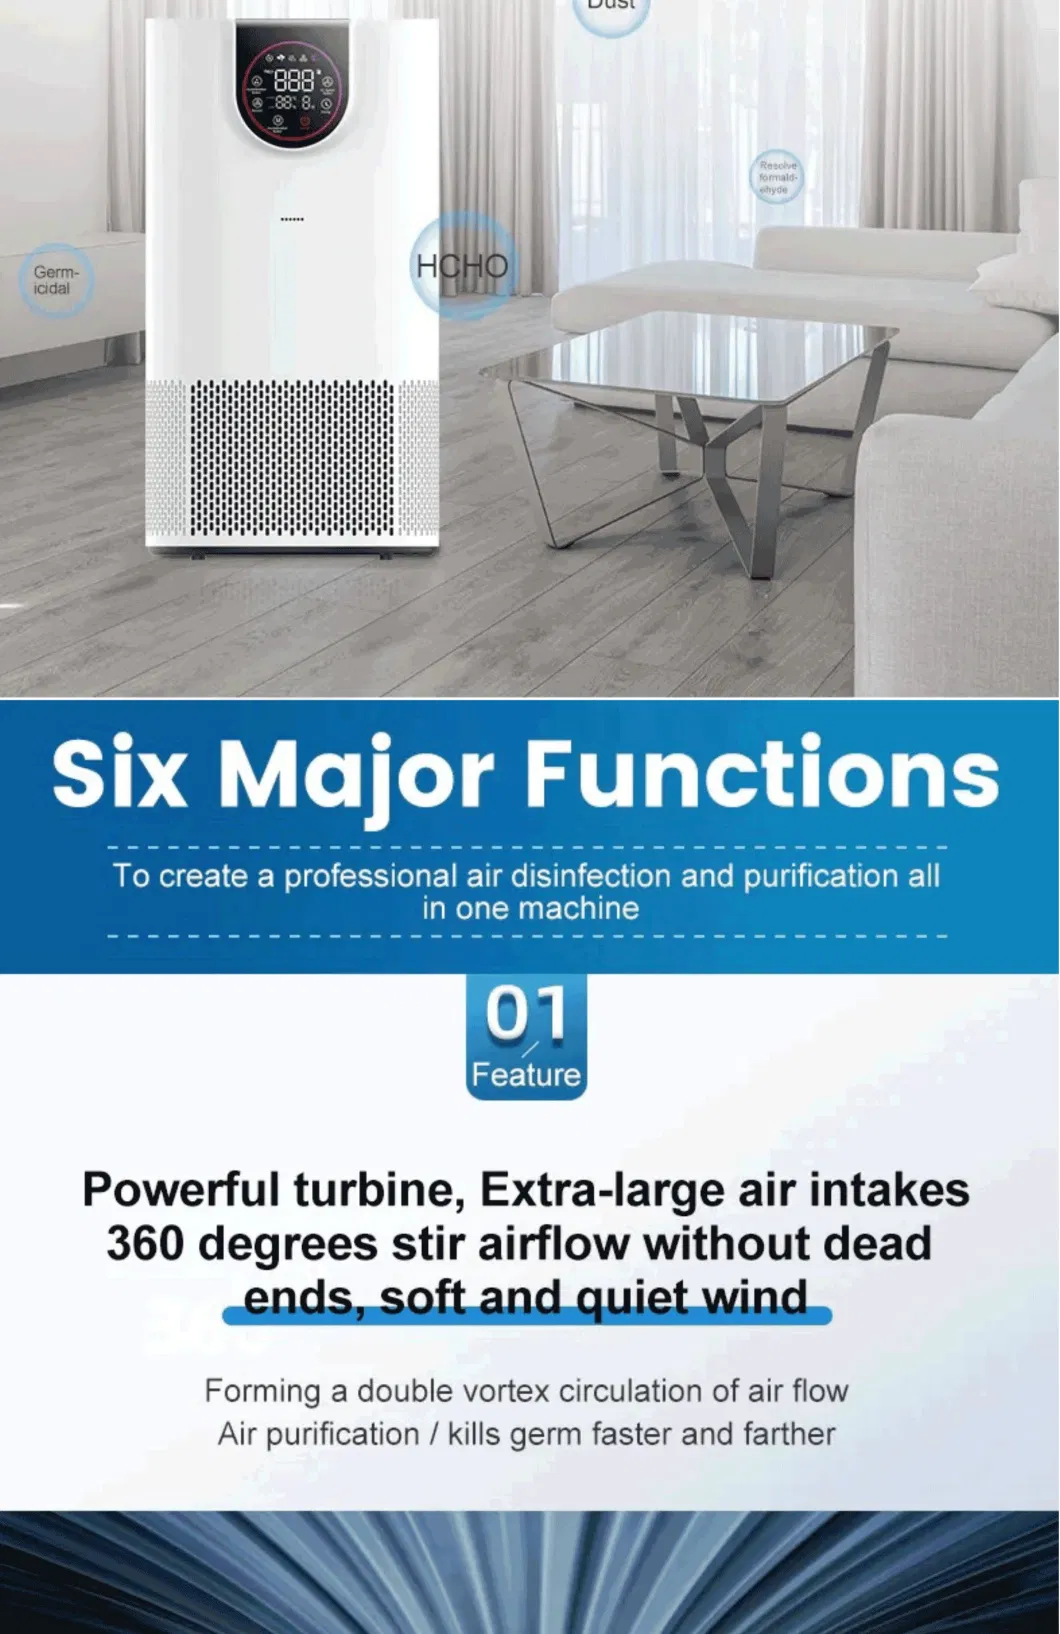 Small Room Remote Control Purification Air Enjoy Natural Ozone Hospital Grade UV Vehicle Anion Air Purifier for School